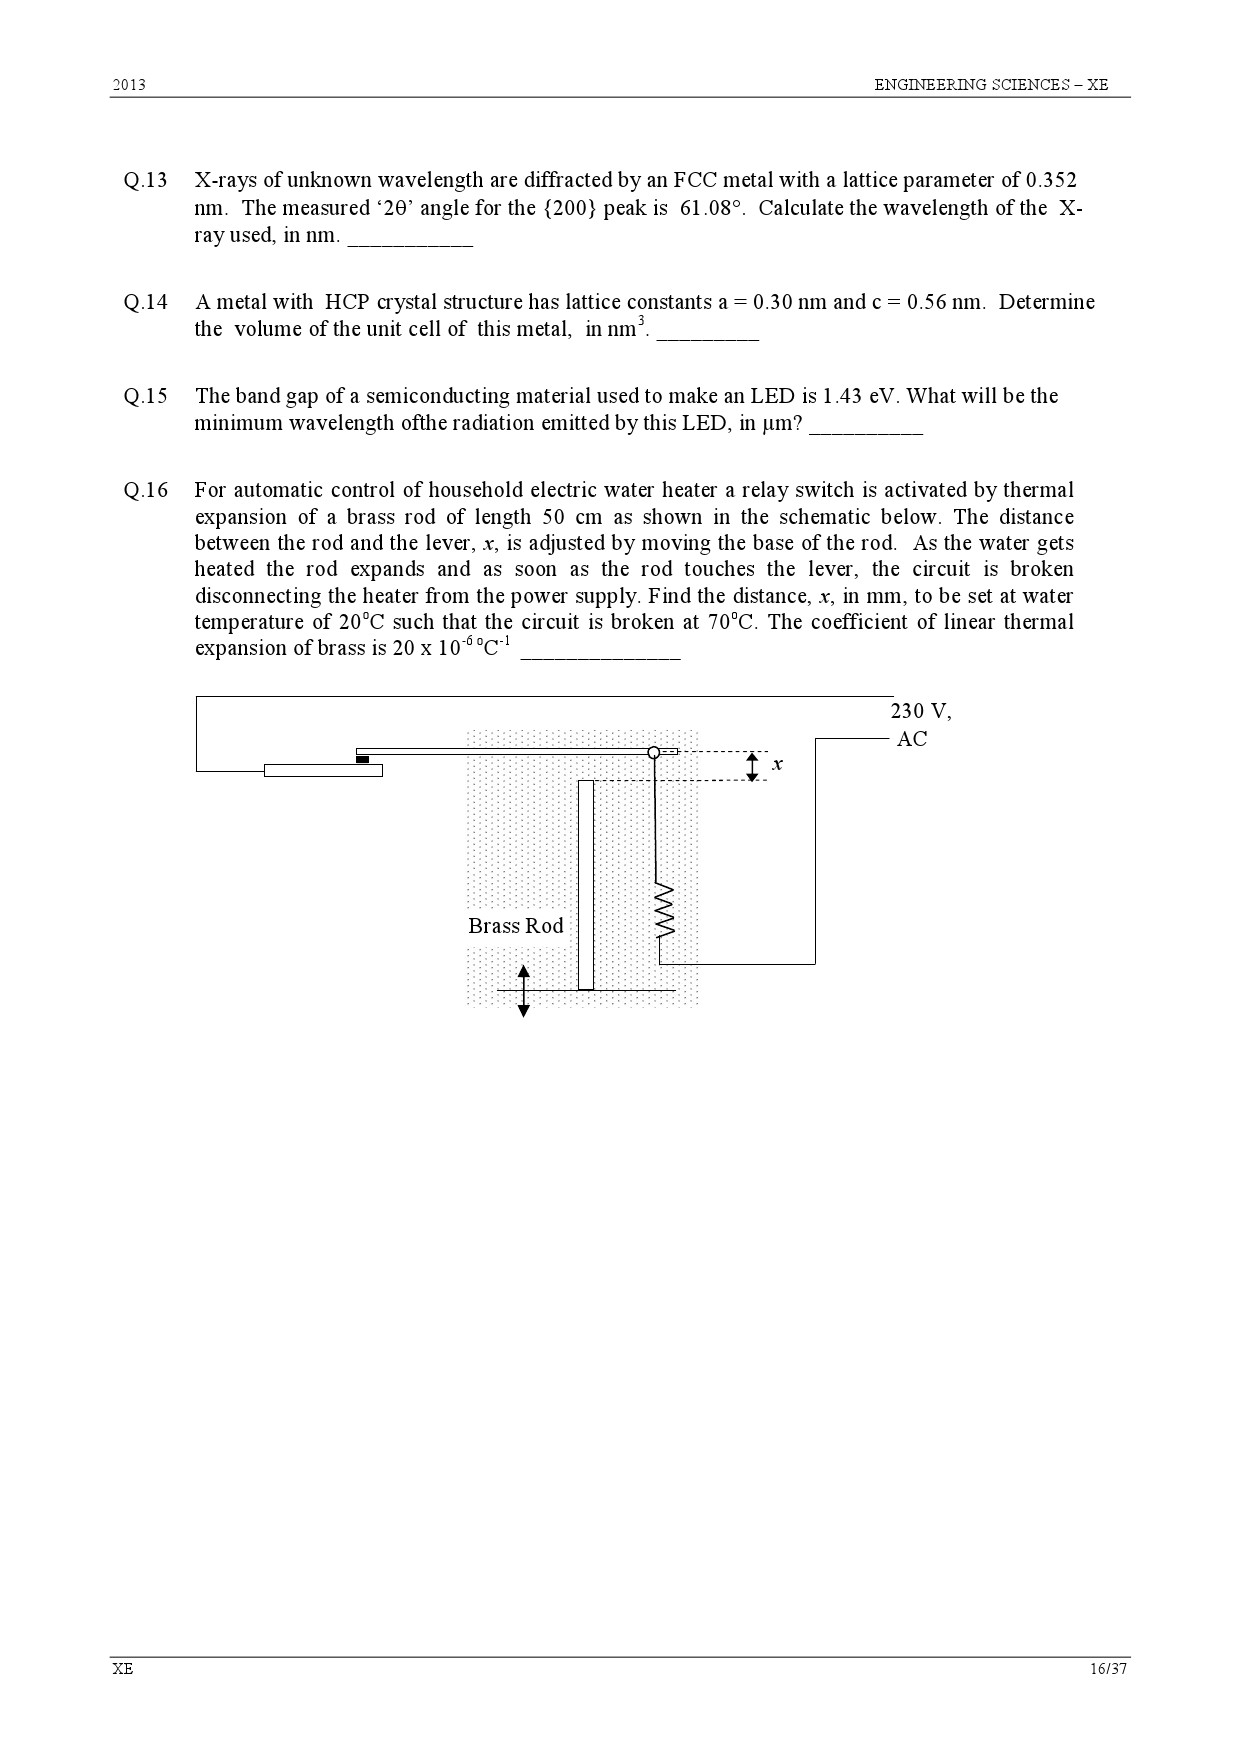 GATE Exam Question Paper 2013 Engineering Sciences 16